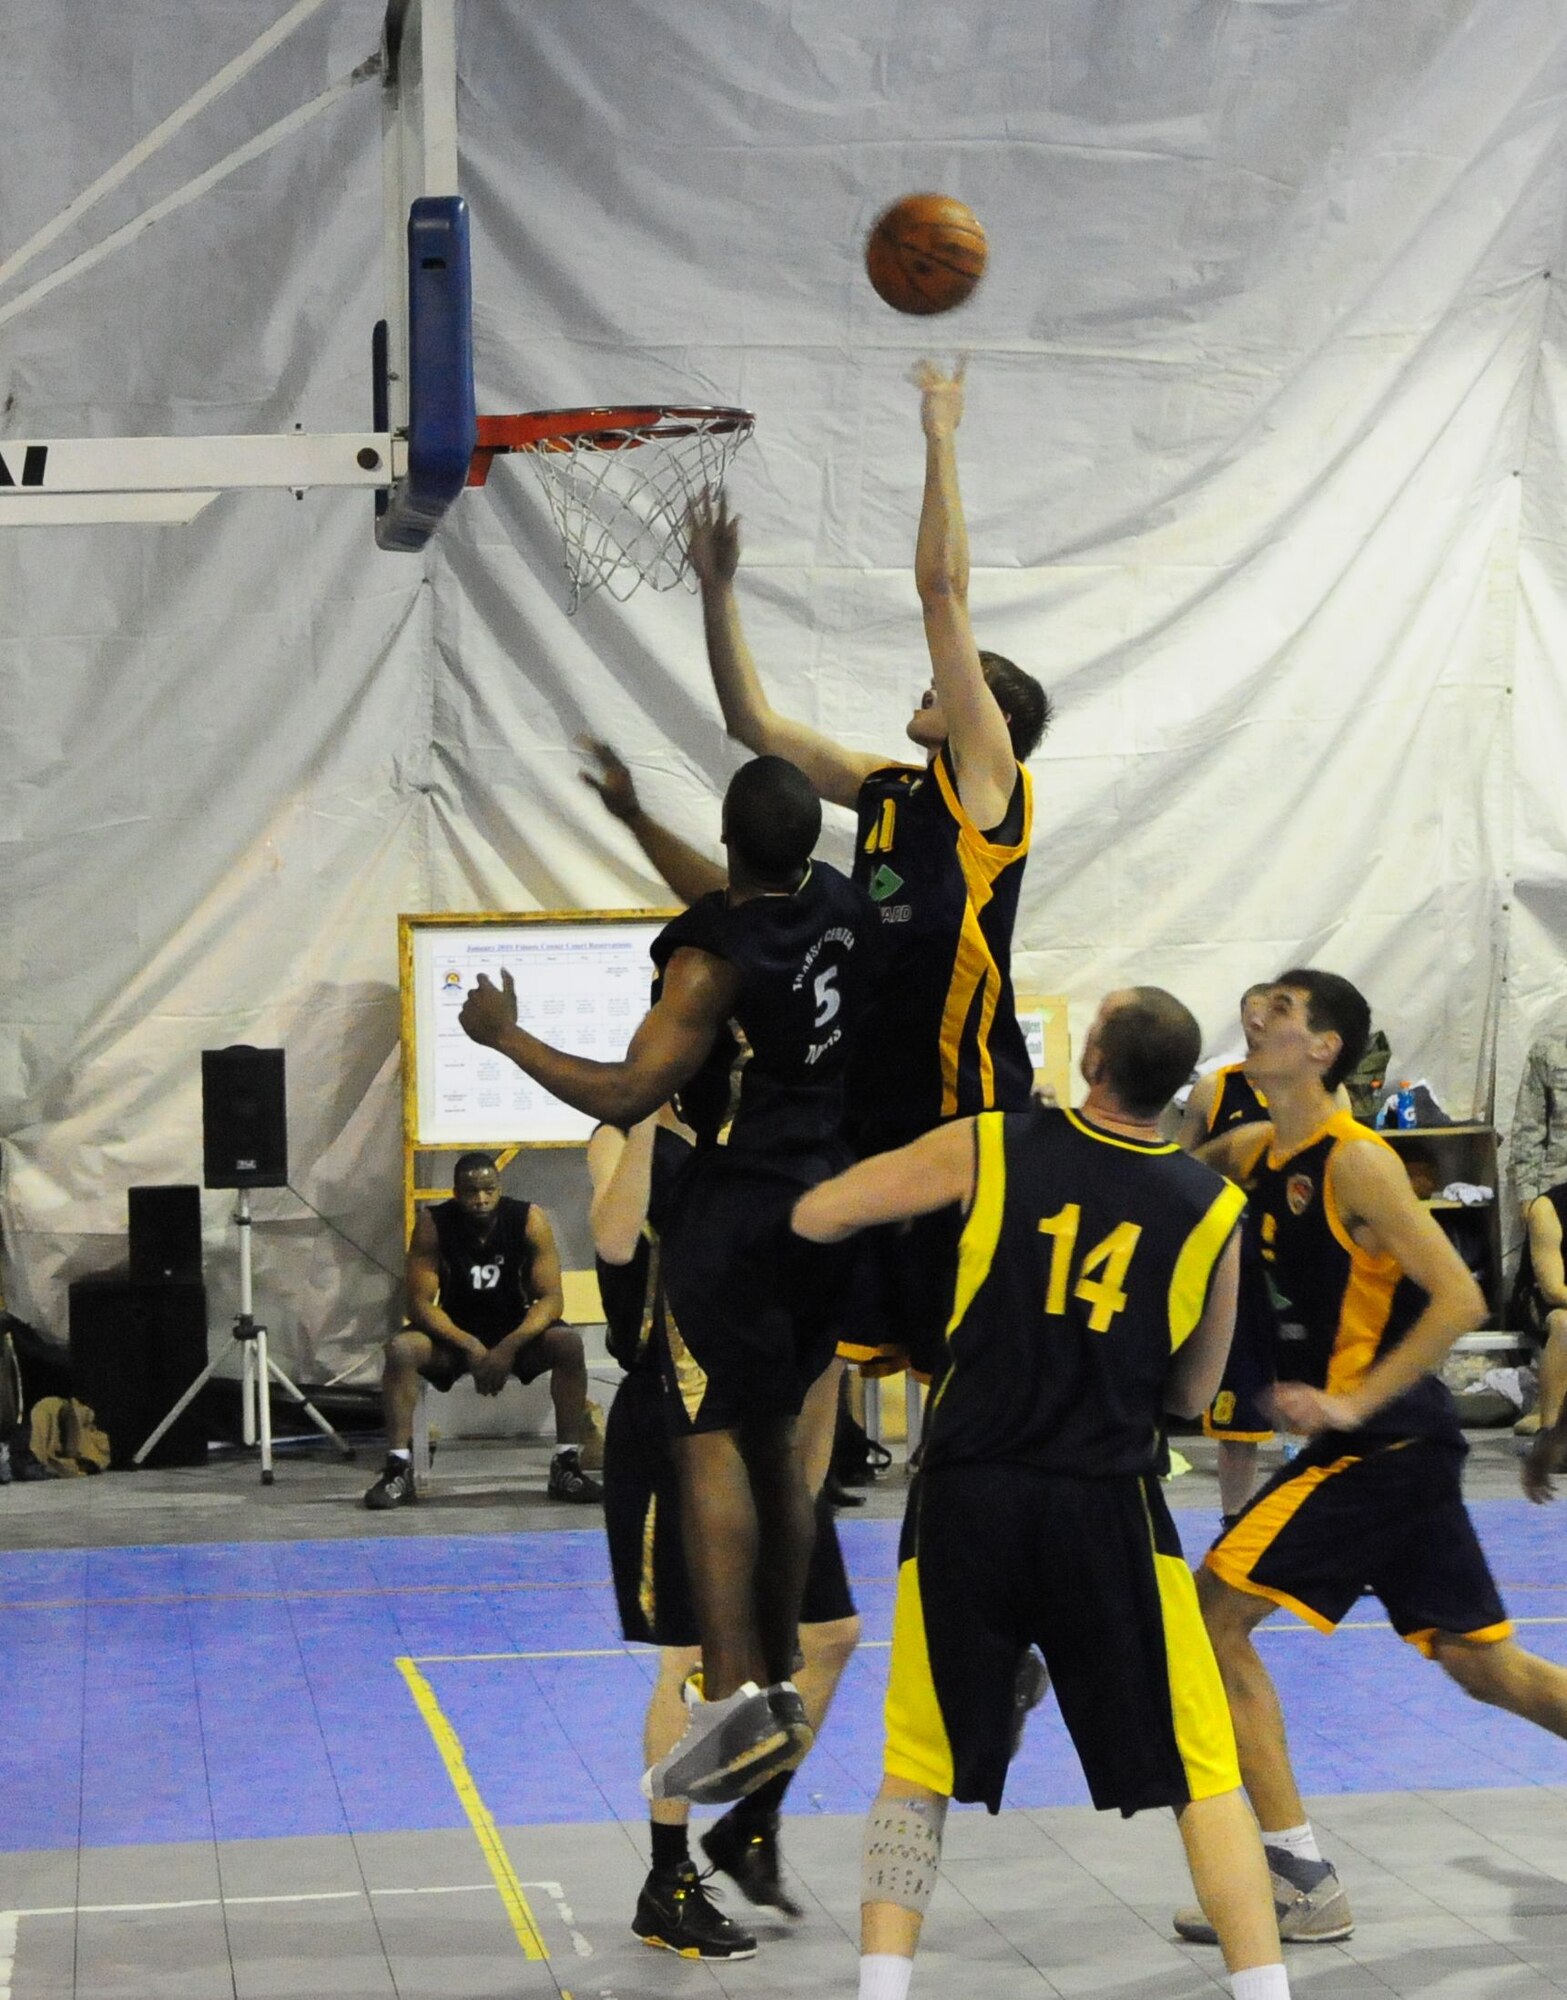 A student of the Academy of Physical Culture and Sports goes high for a tip in during a good will basketball game against U.S. Air Force members from the Transit Center at Manas, Kyrgyzstan, Jan. 19, 2010. The APCS defeated the TC team 72-55. (U.S. Air Force photo/Senior Master Sgt. Mike Litsey/released)